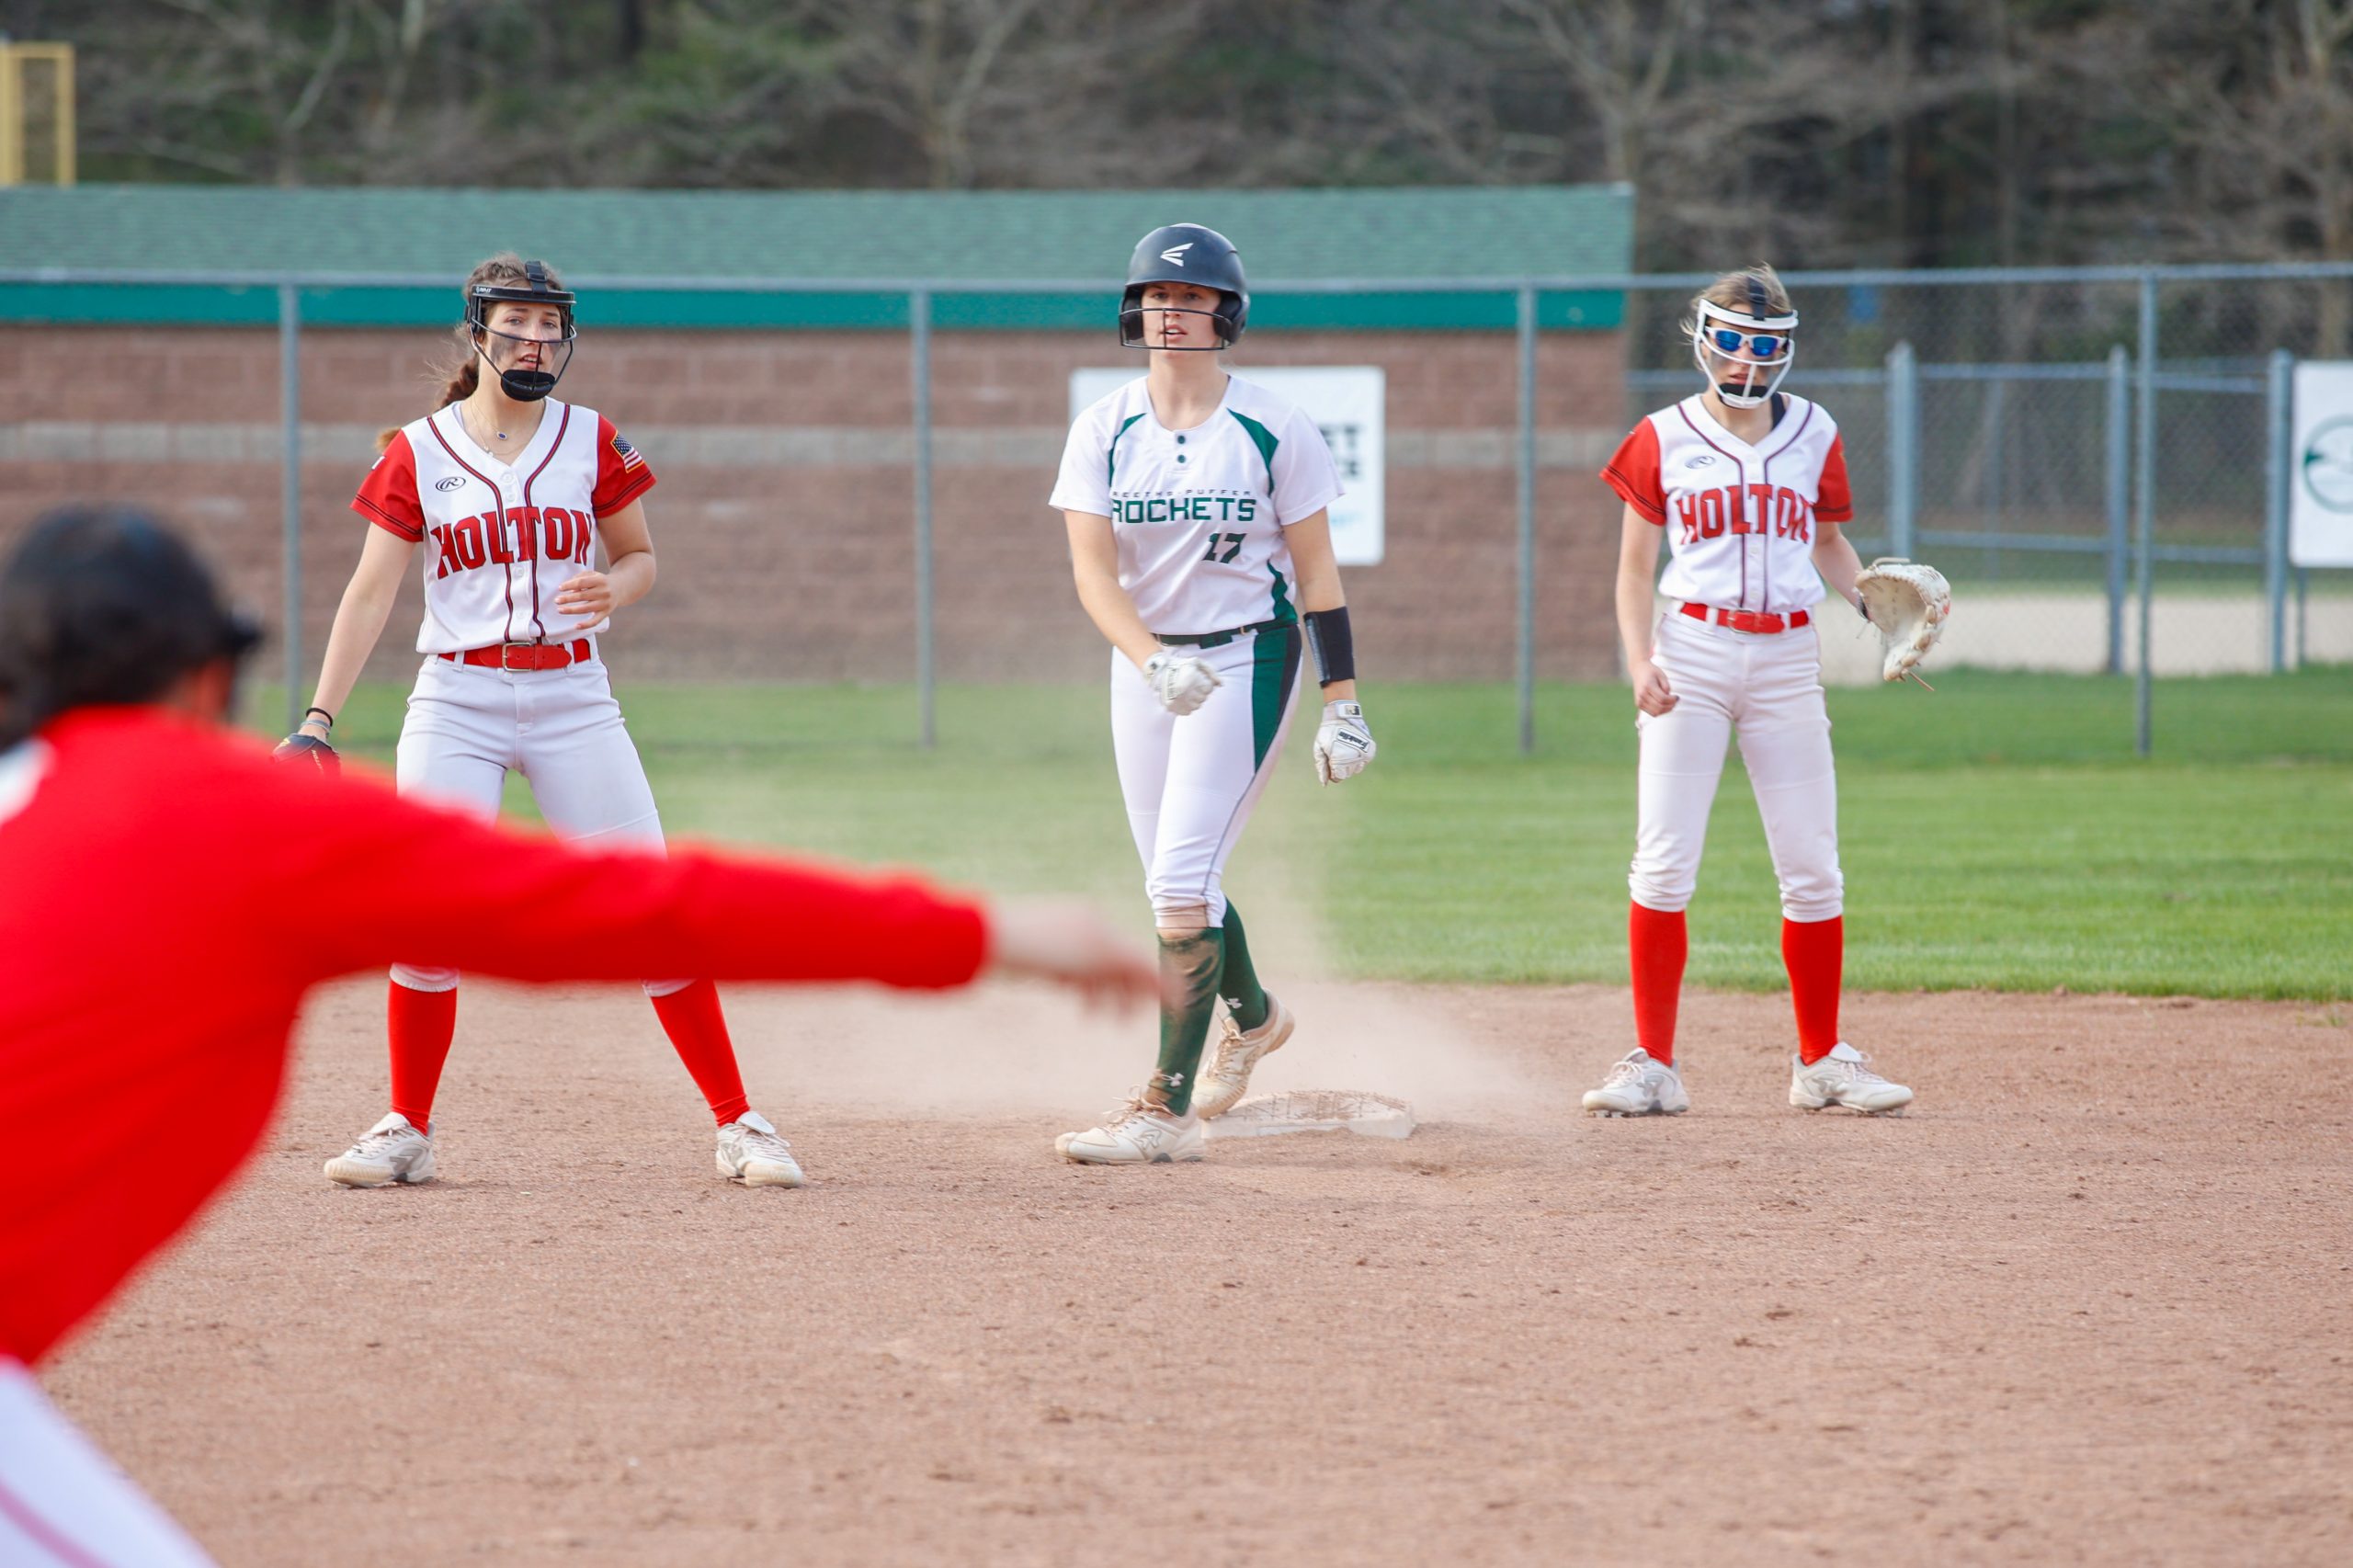 Reeths-Puffer sweeps Holton in non-league softball twinbill to remain undefeated on season